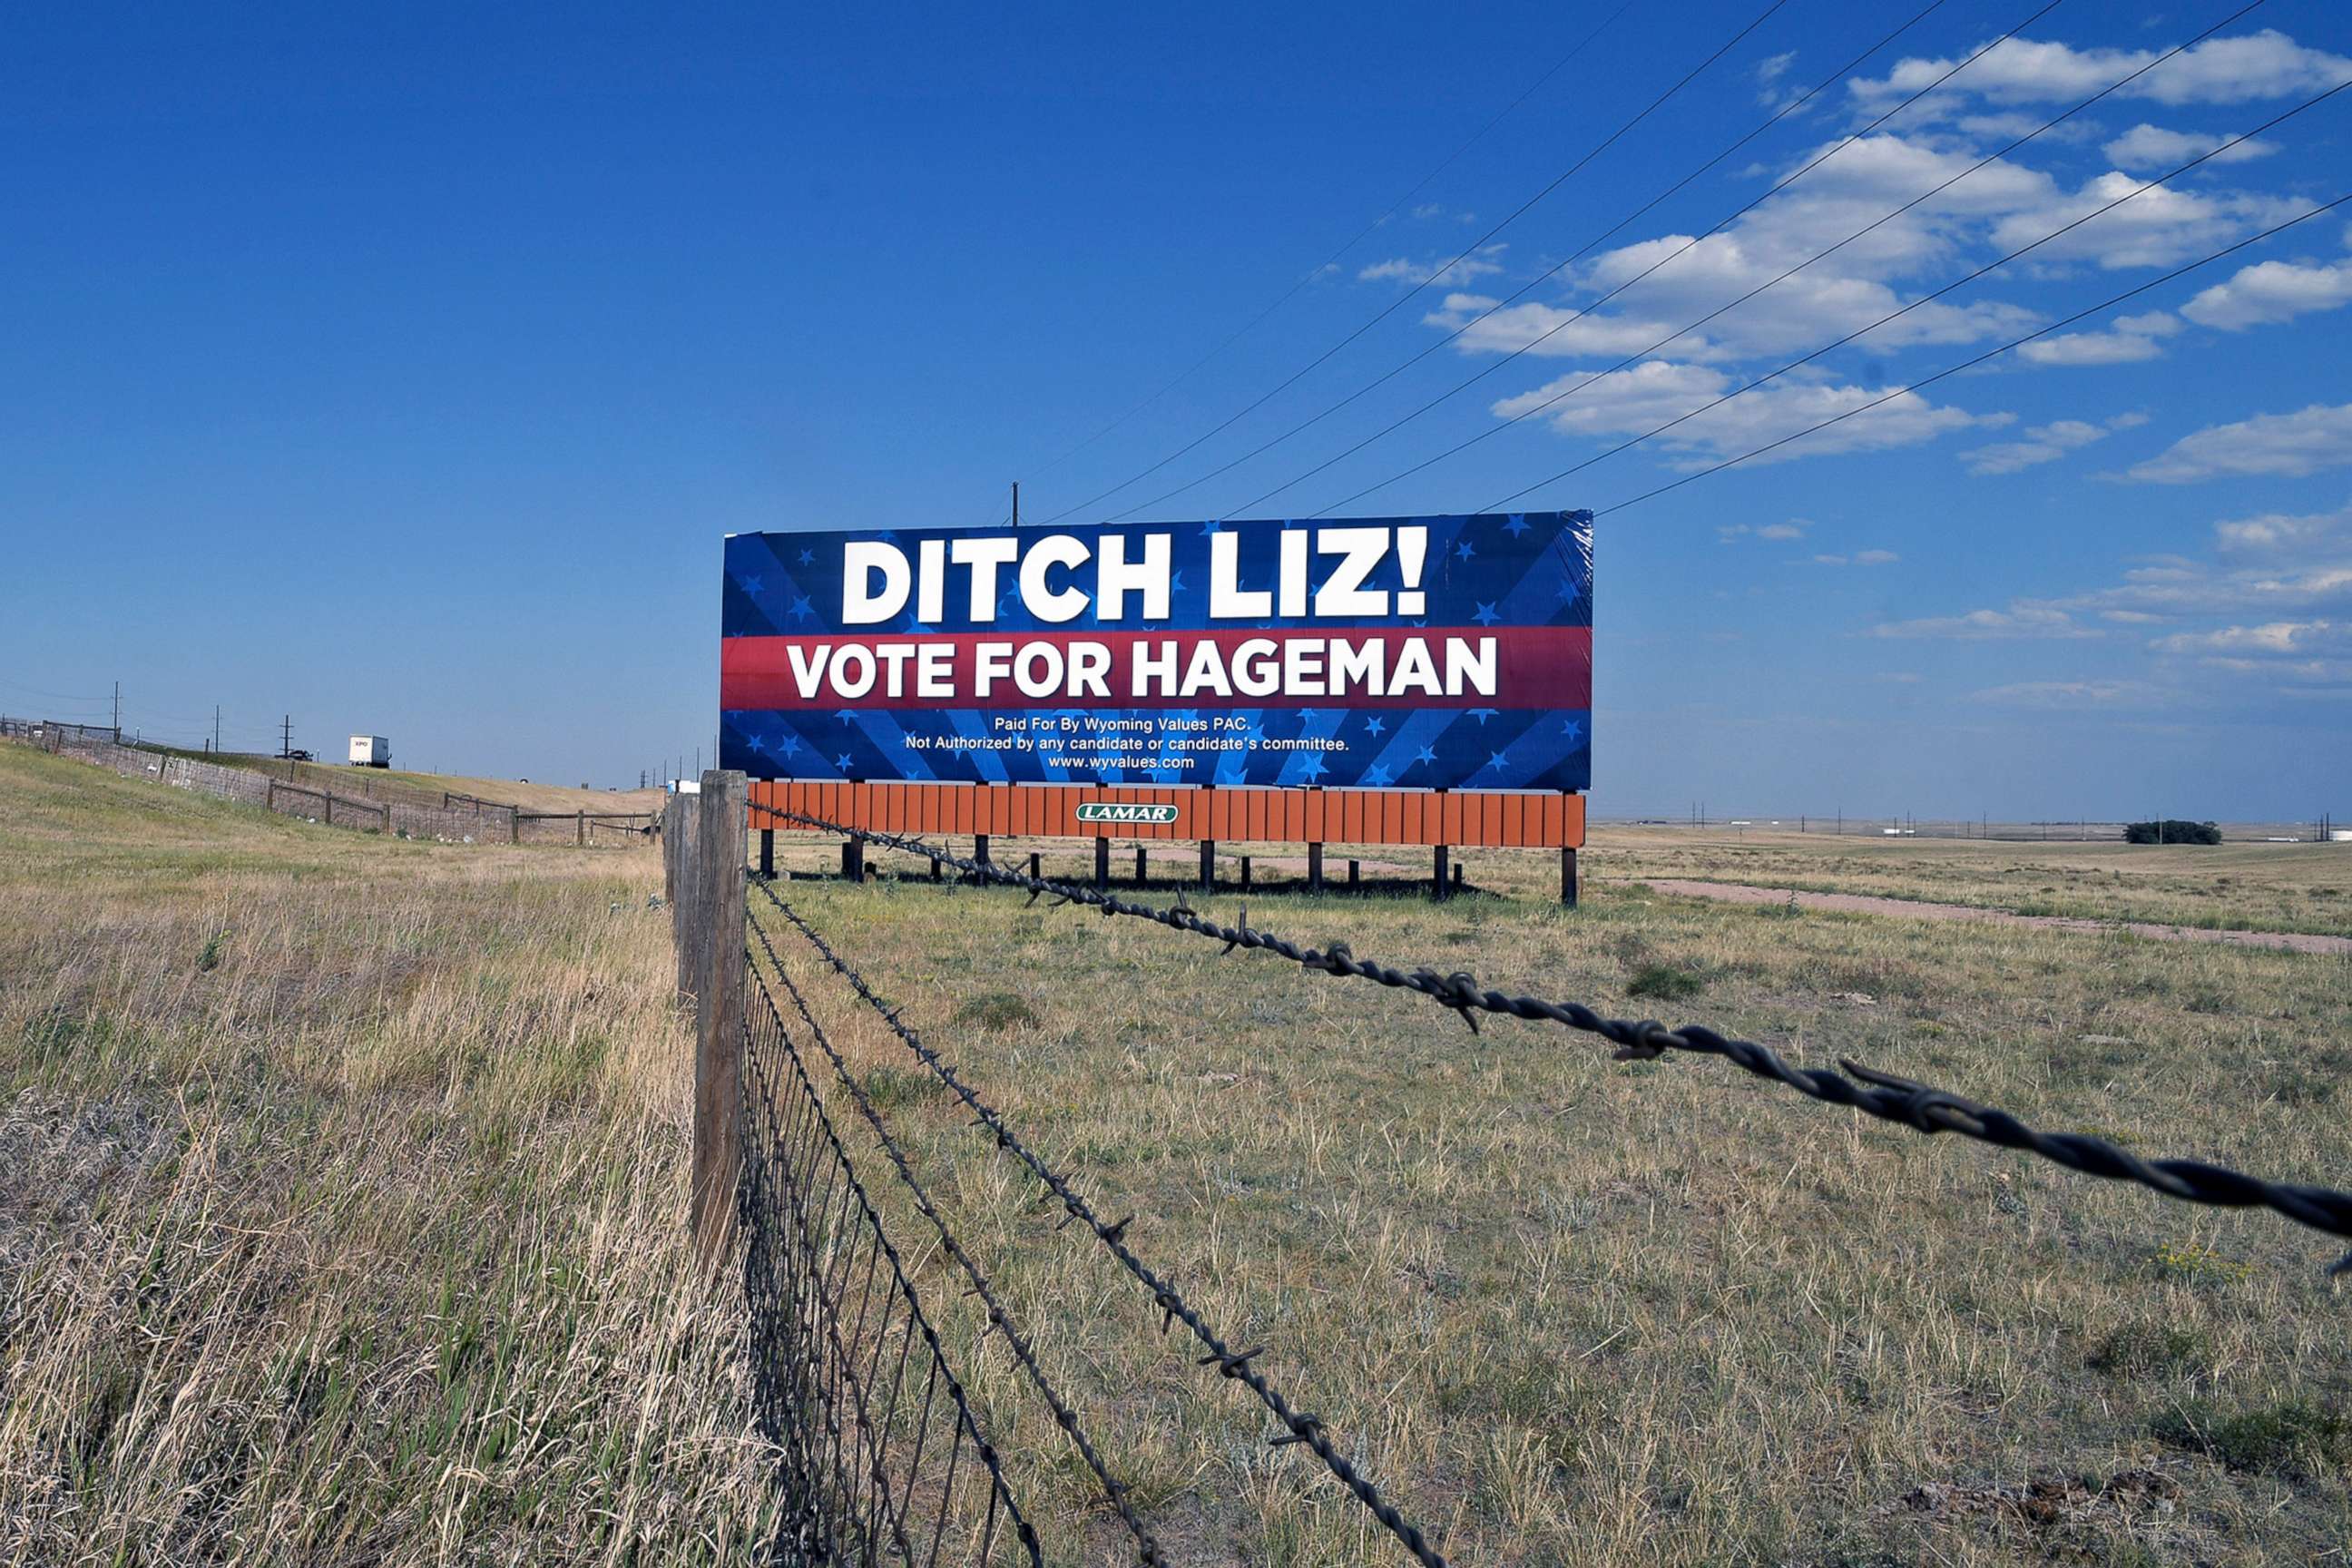 PHOTO: A billboard calls on voters to cast their ballots for Harriet Hageman, who is running against incumbent Rep. Liz Cheney in the Republican primary election outside Cheyenne, Wyo., July 19, 2022.